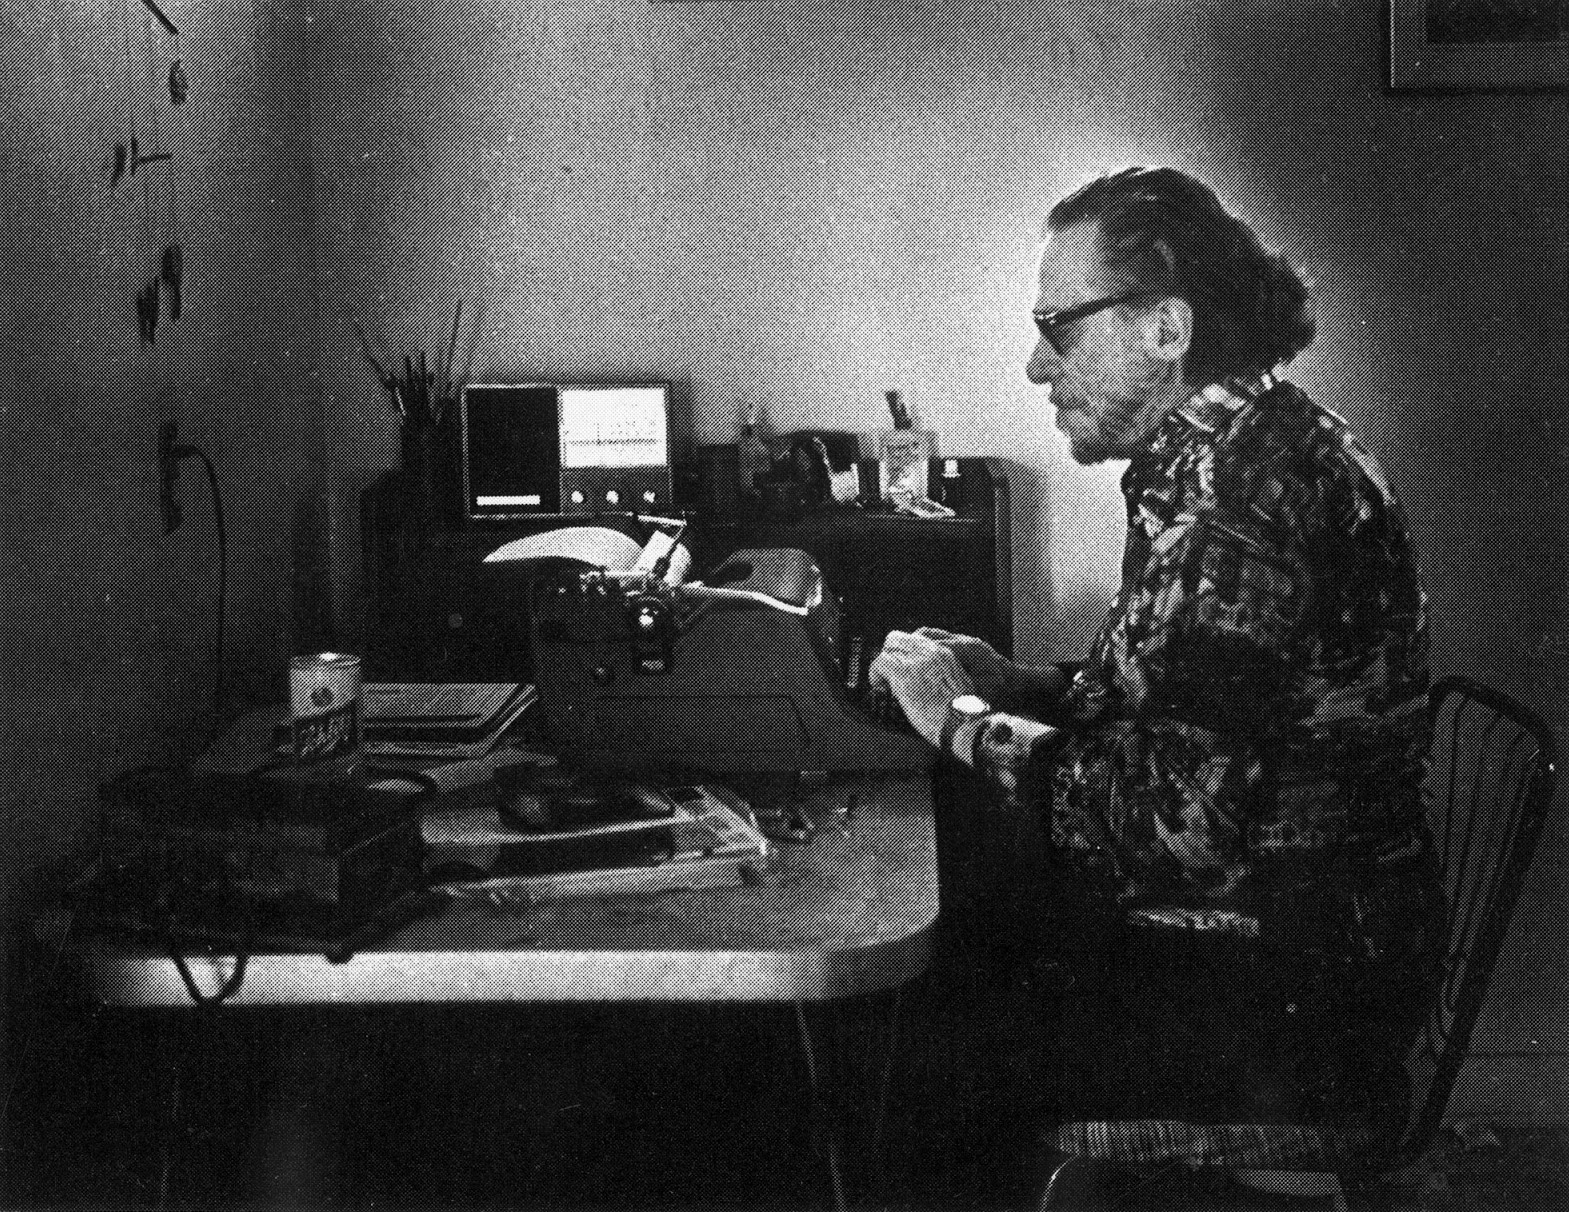 Postcard featuring Charles Bukowski at his typewriter in 1988. Photo by Joan Levine Gannij, published by Island International Bookstore, Amsterdam. Courtesy of the Huntington Library, Art Collections and Botanical Gardens. (HAND IN PHOTO 9-29-10)